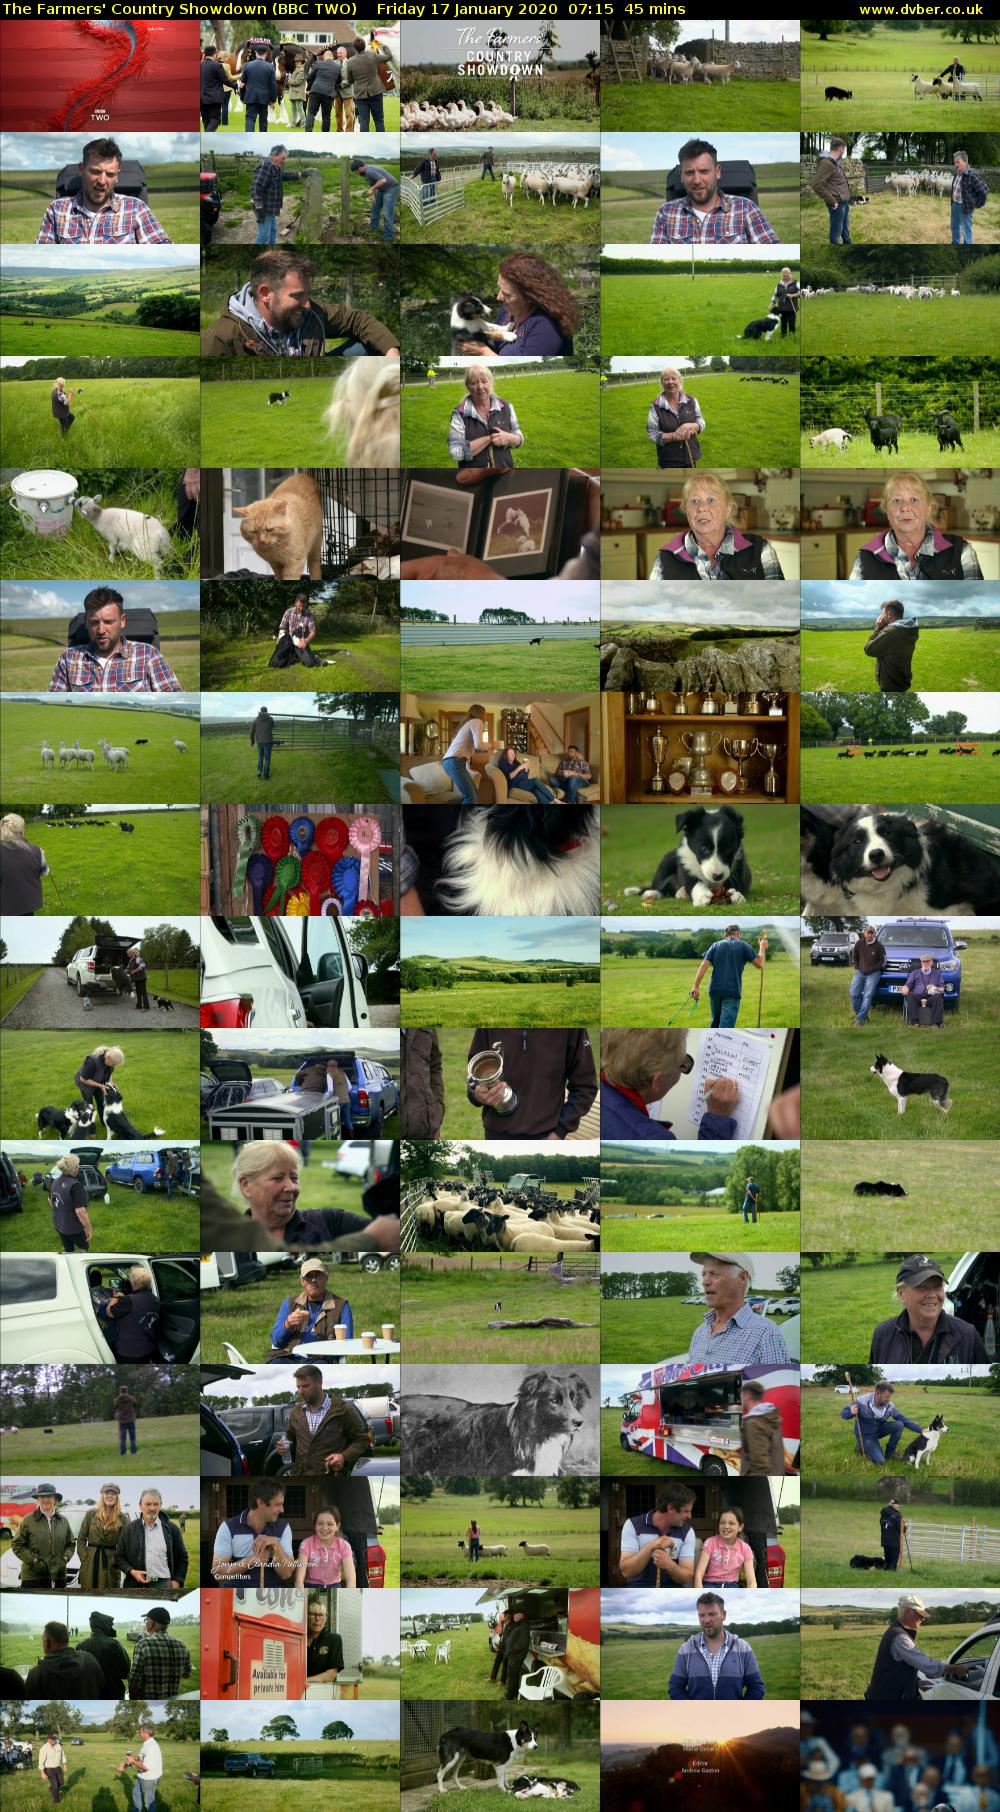 The Farmers' Country Showdown (BBC TWO) Friday 17 January 2020 07:15 - 08:00